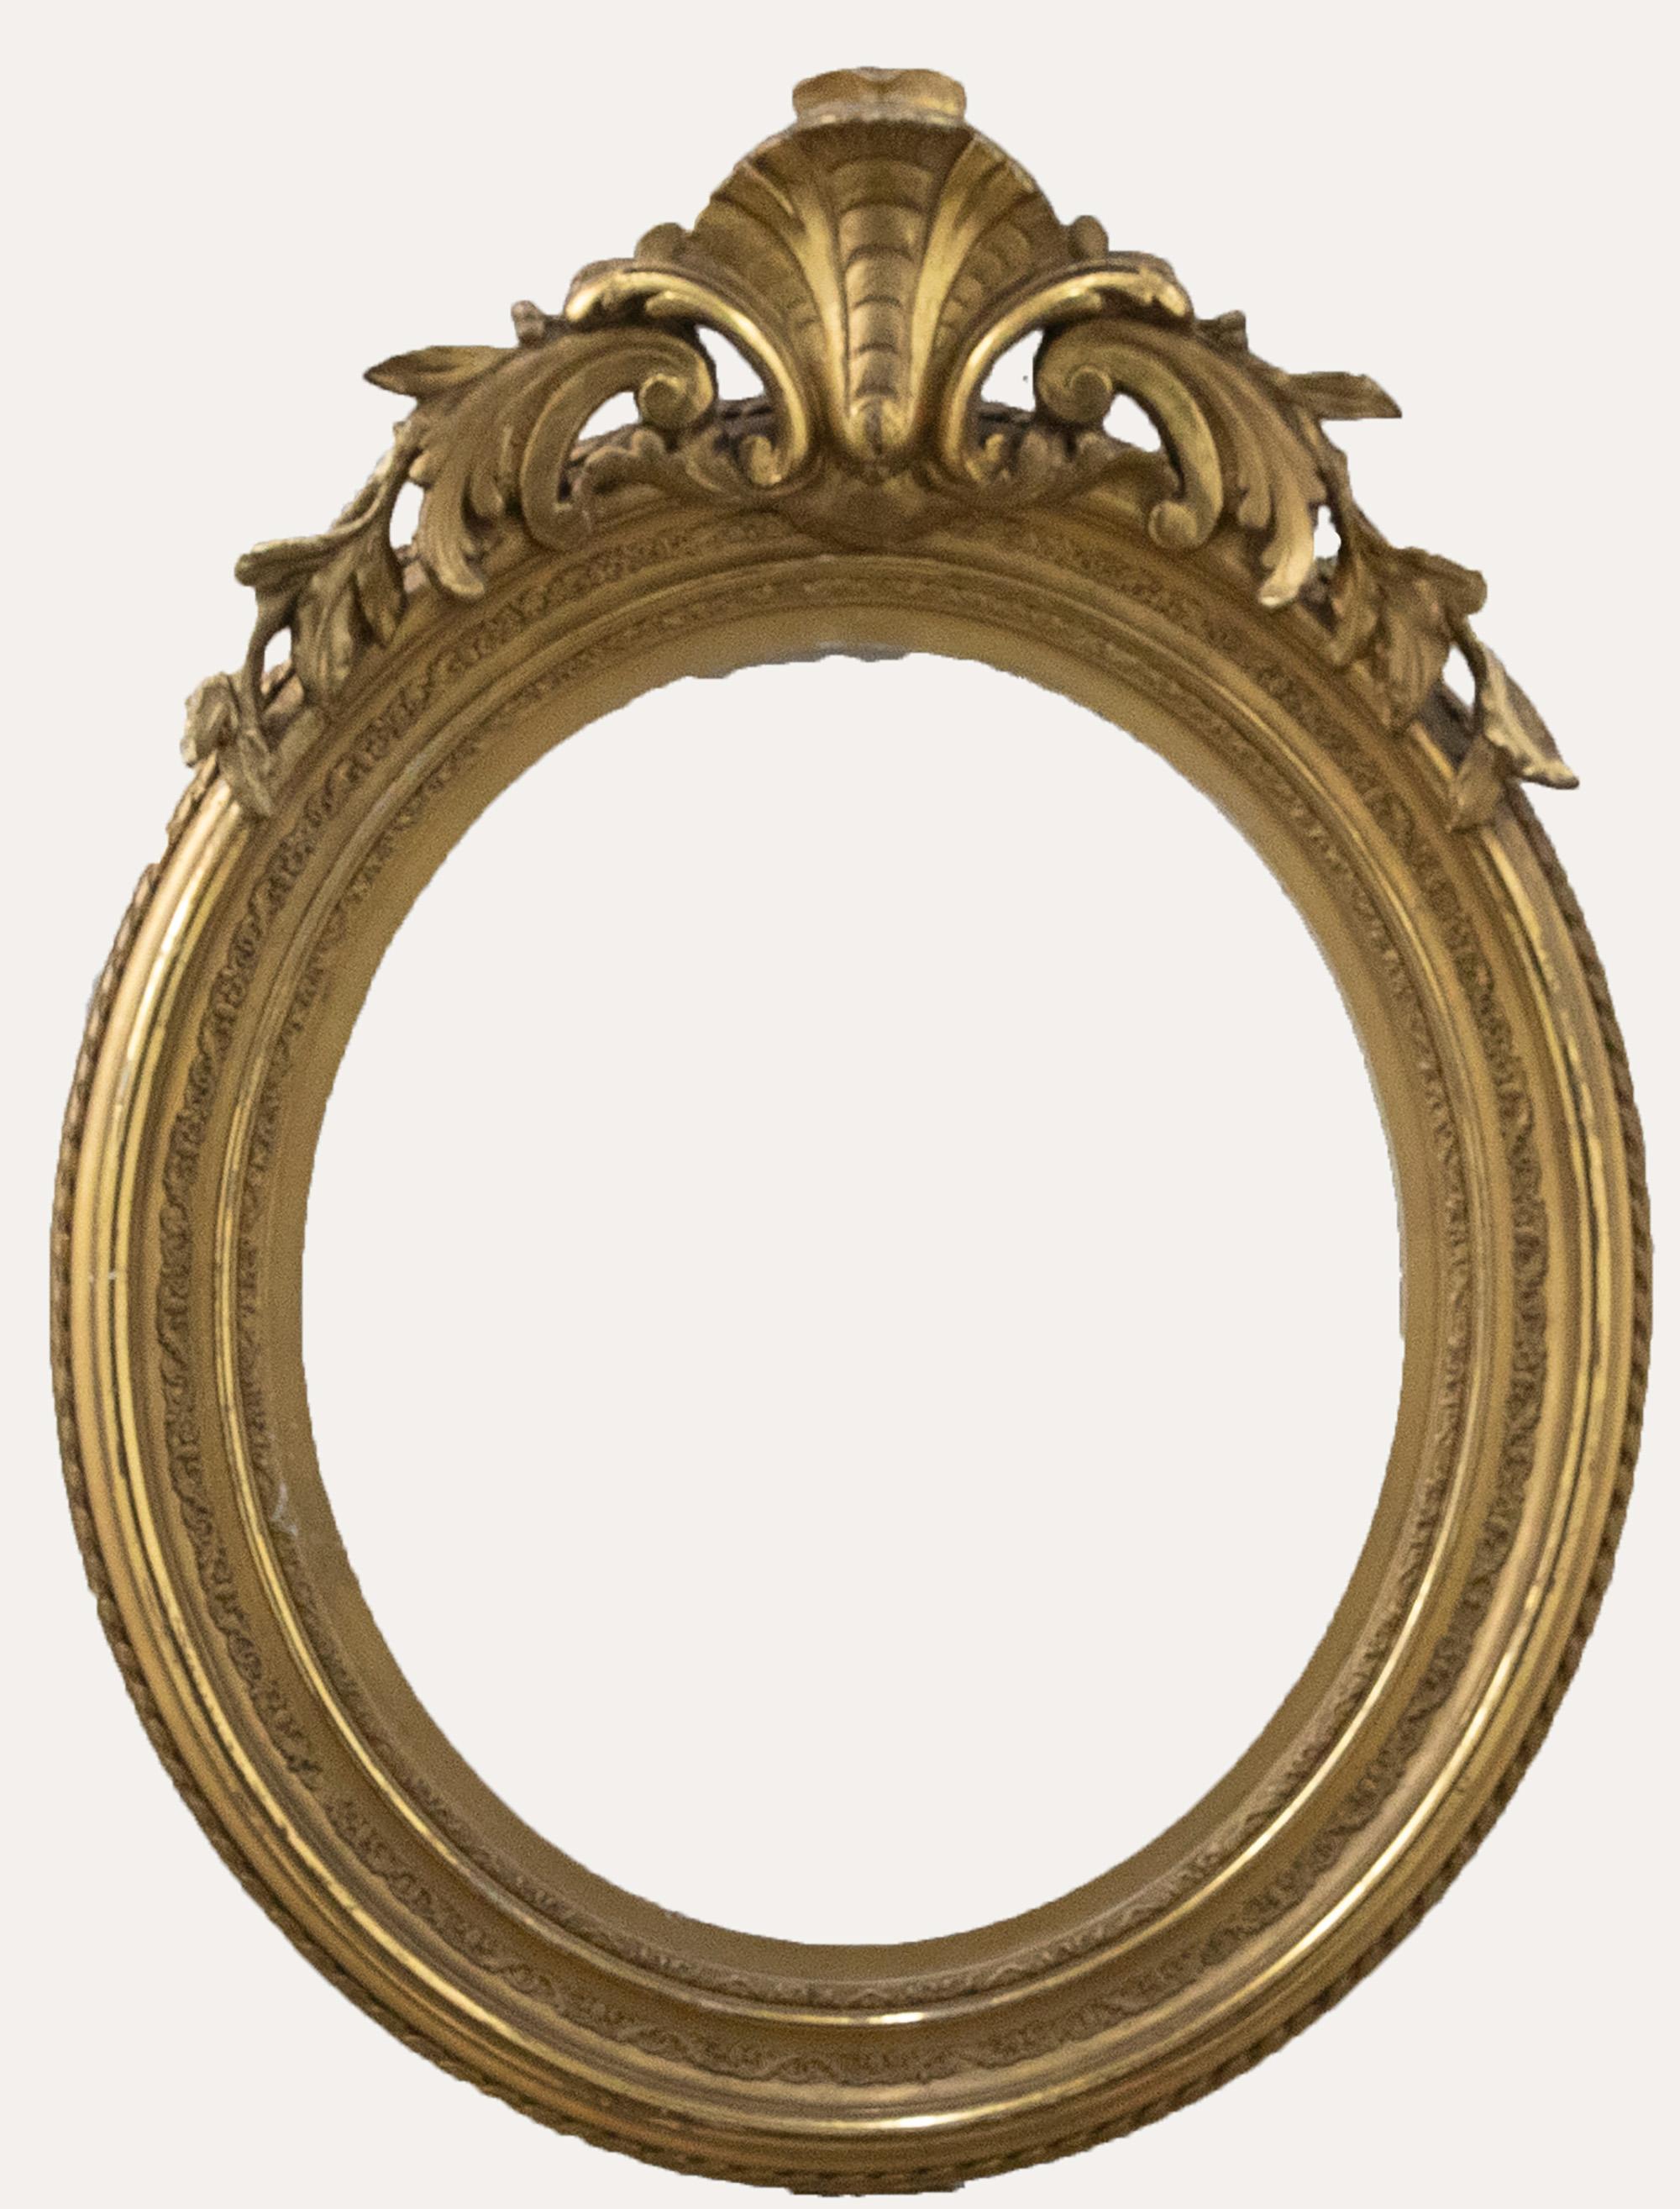 Oval 19th Century French Rococo Frame with Shell Ornament - Art by Unknown